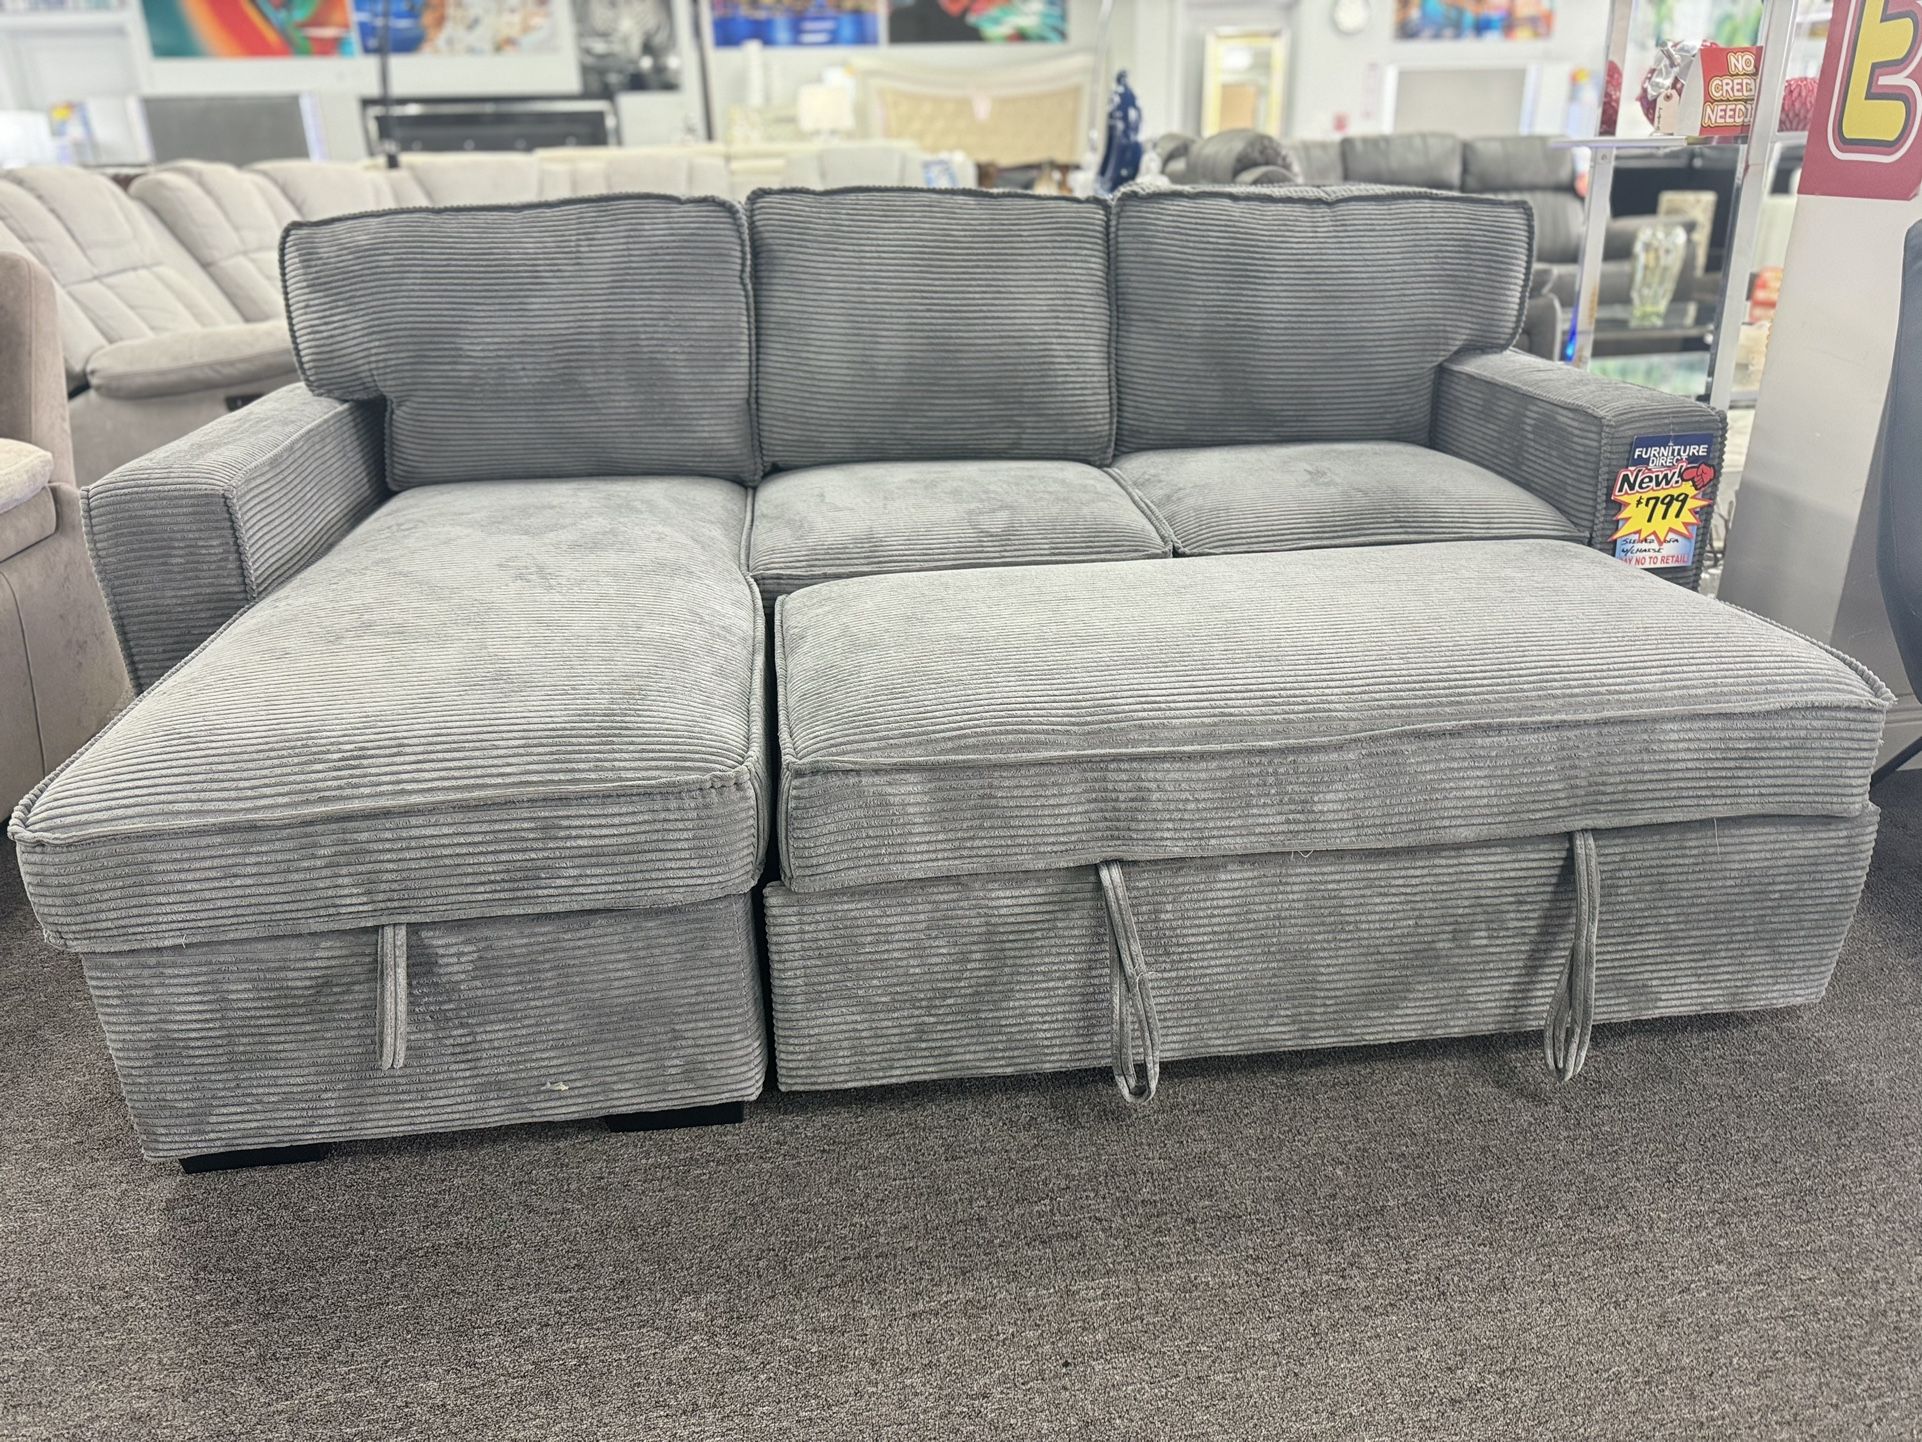 Gorgeous Grey Pull Out Sleeper Sectional On Sale Now Only $799 